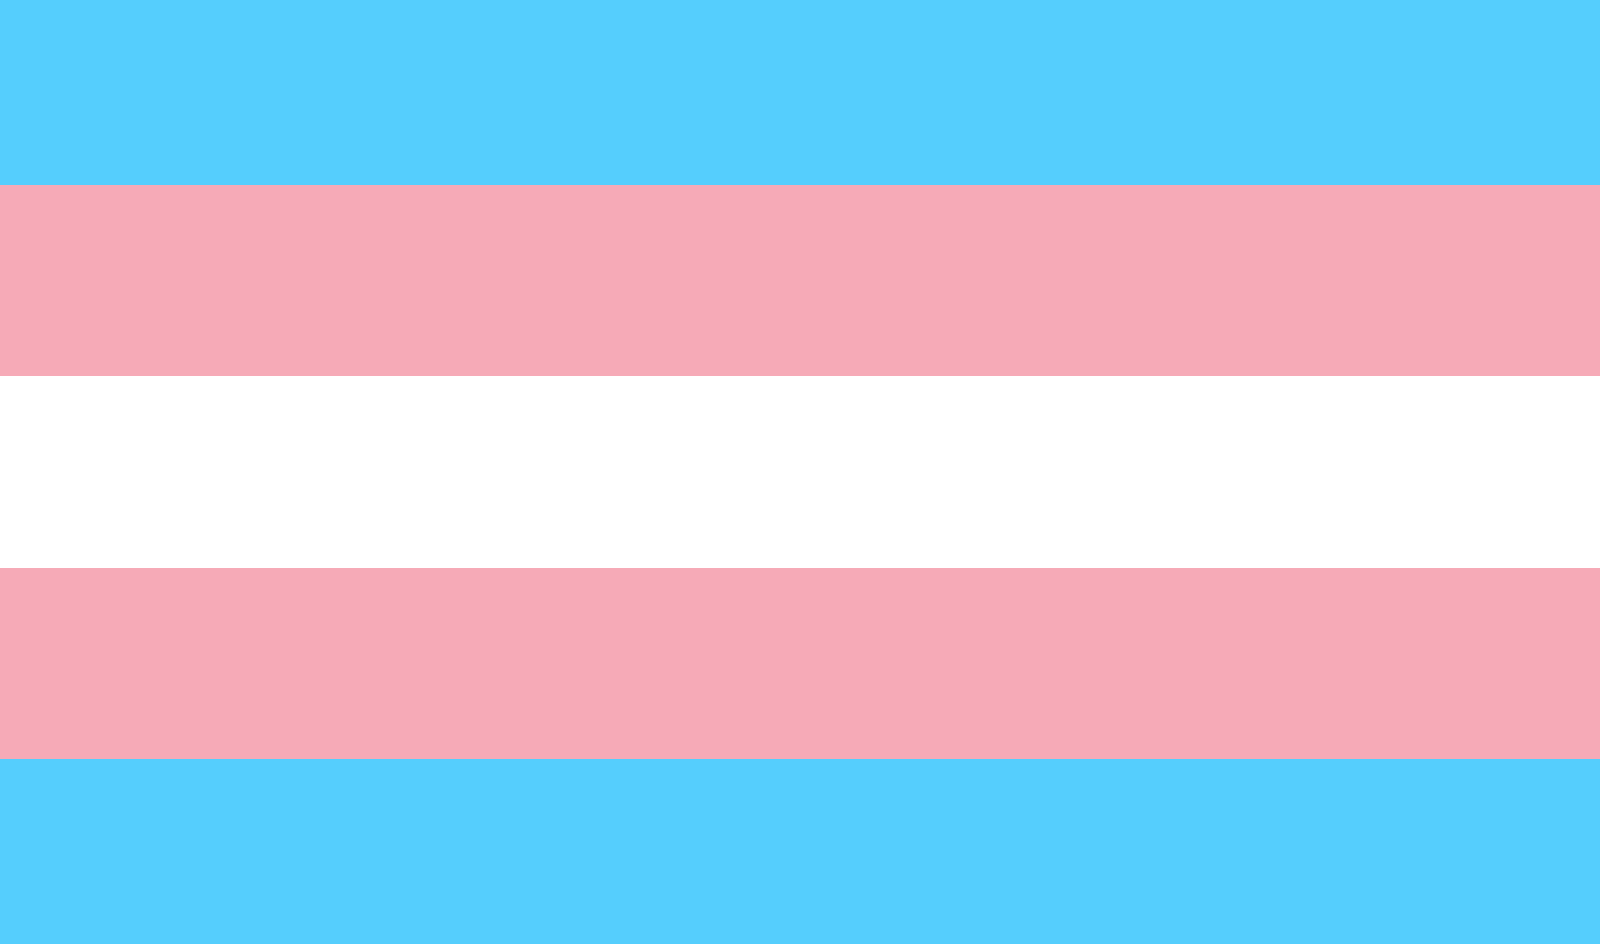 An image of the transgender flag. It features a light blue stripes on the top and bottom of the flag, with pink stripes above and below the blue stripes as well as white stripe in the middle. 